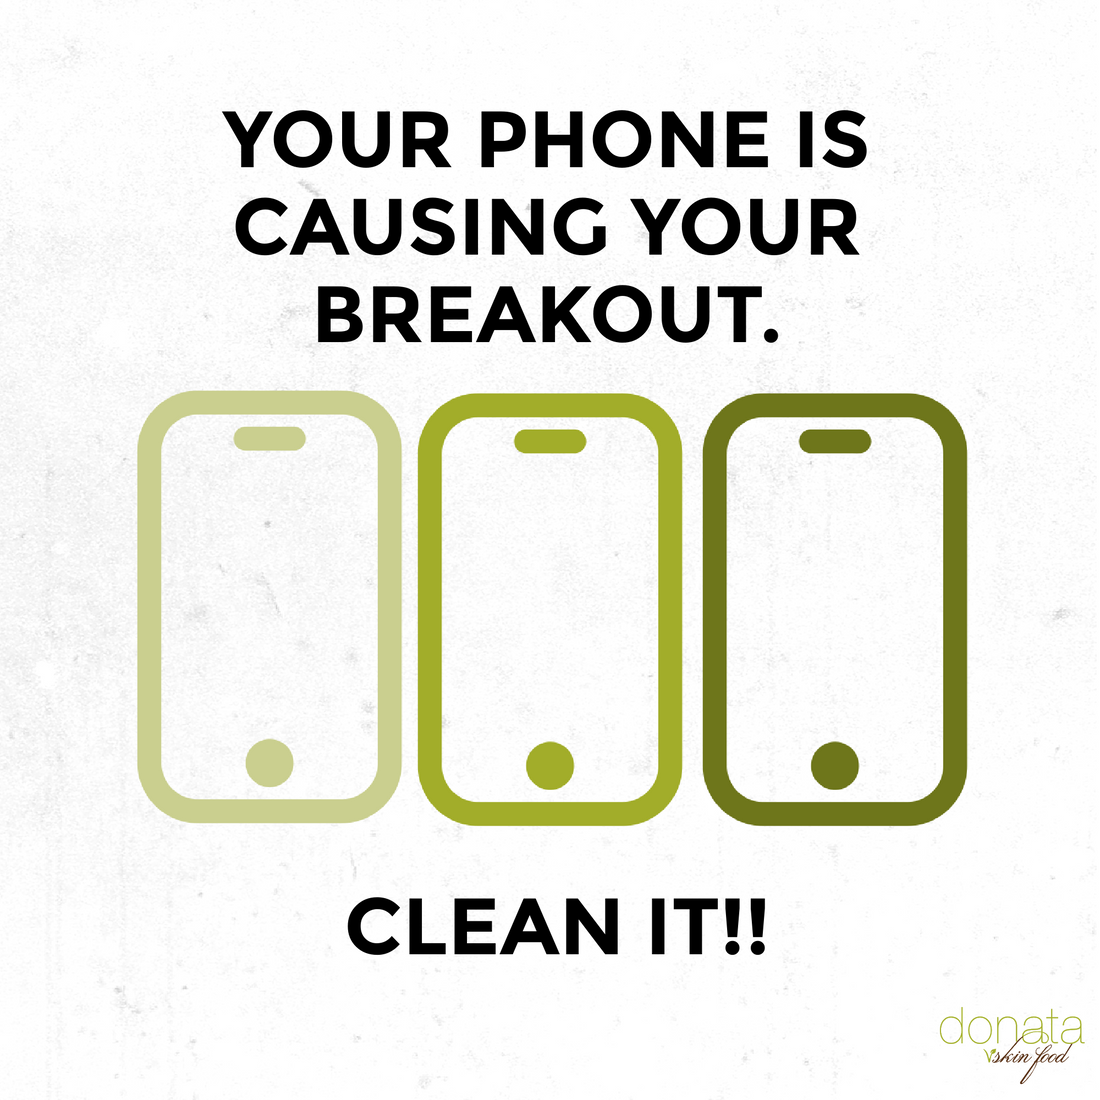 Is Your Cell Phone Causing Skin Issues?